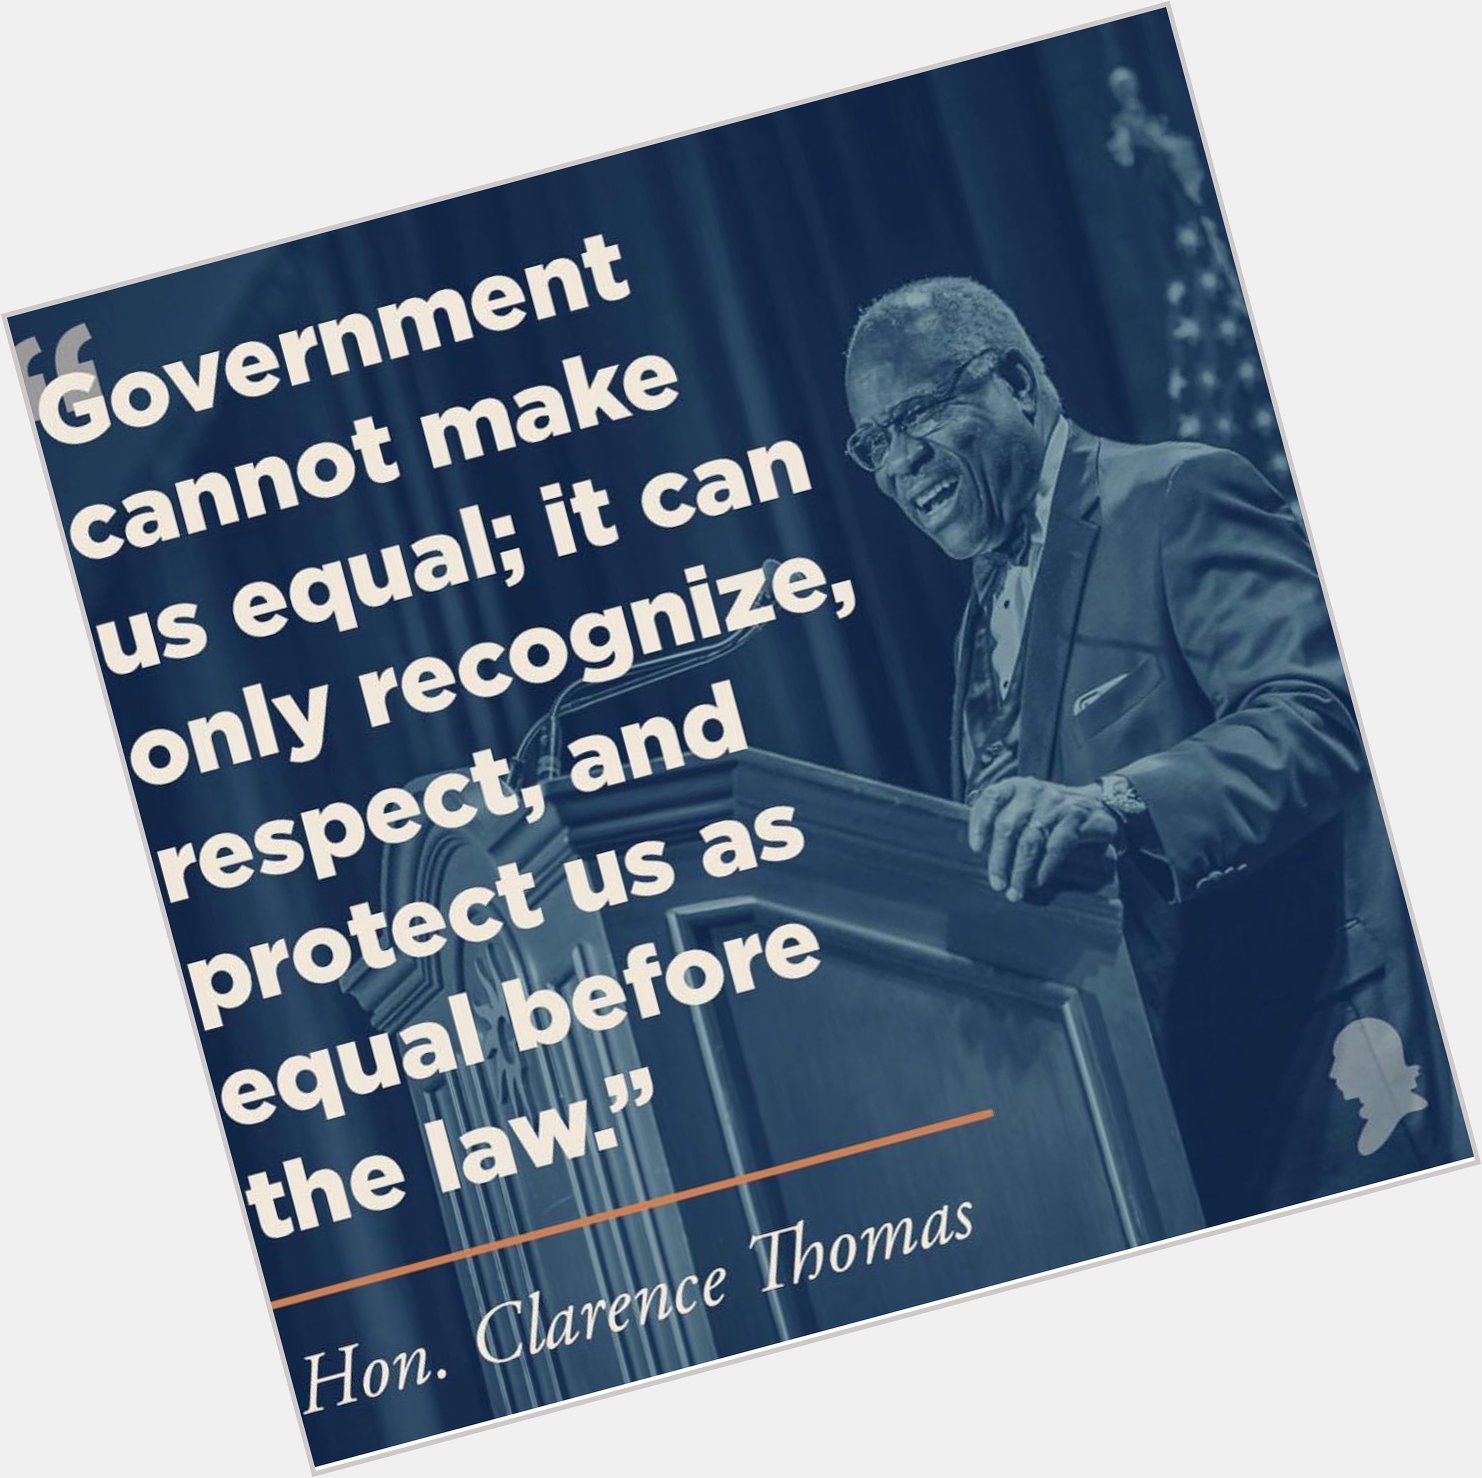   Happy Birthday to the Honorable Clarence Thomas!       : 